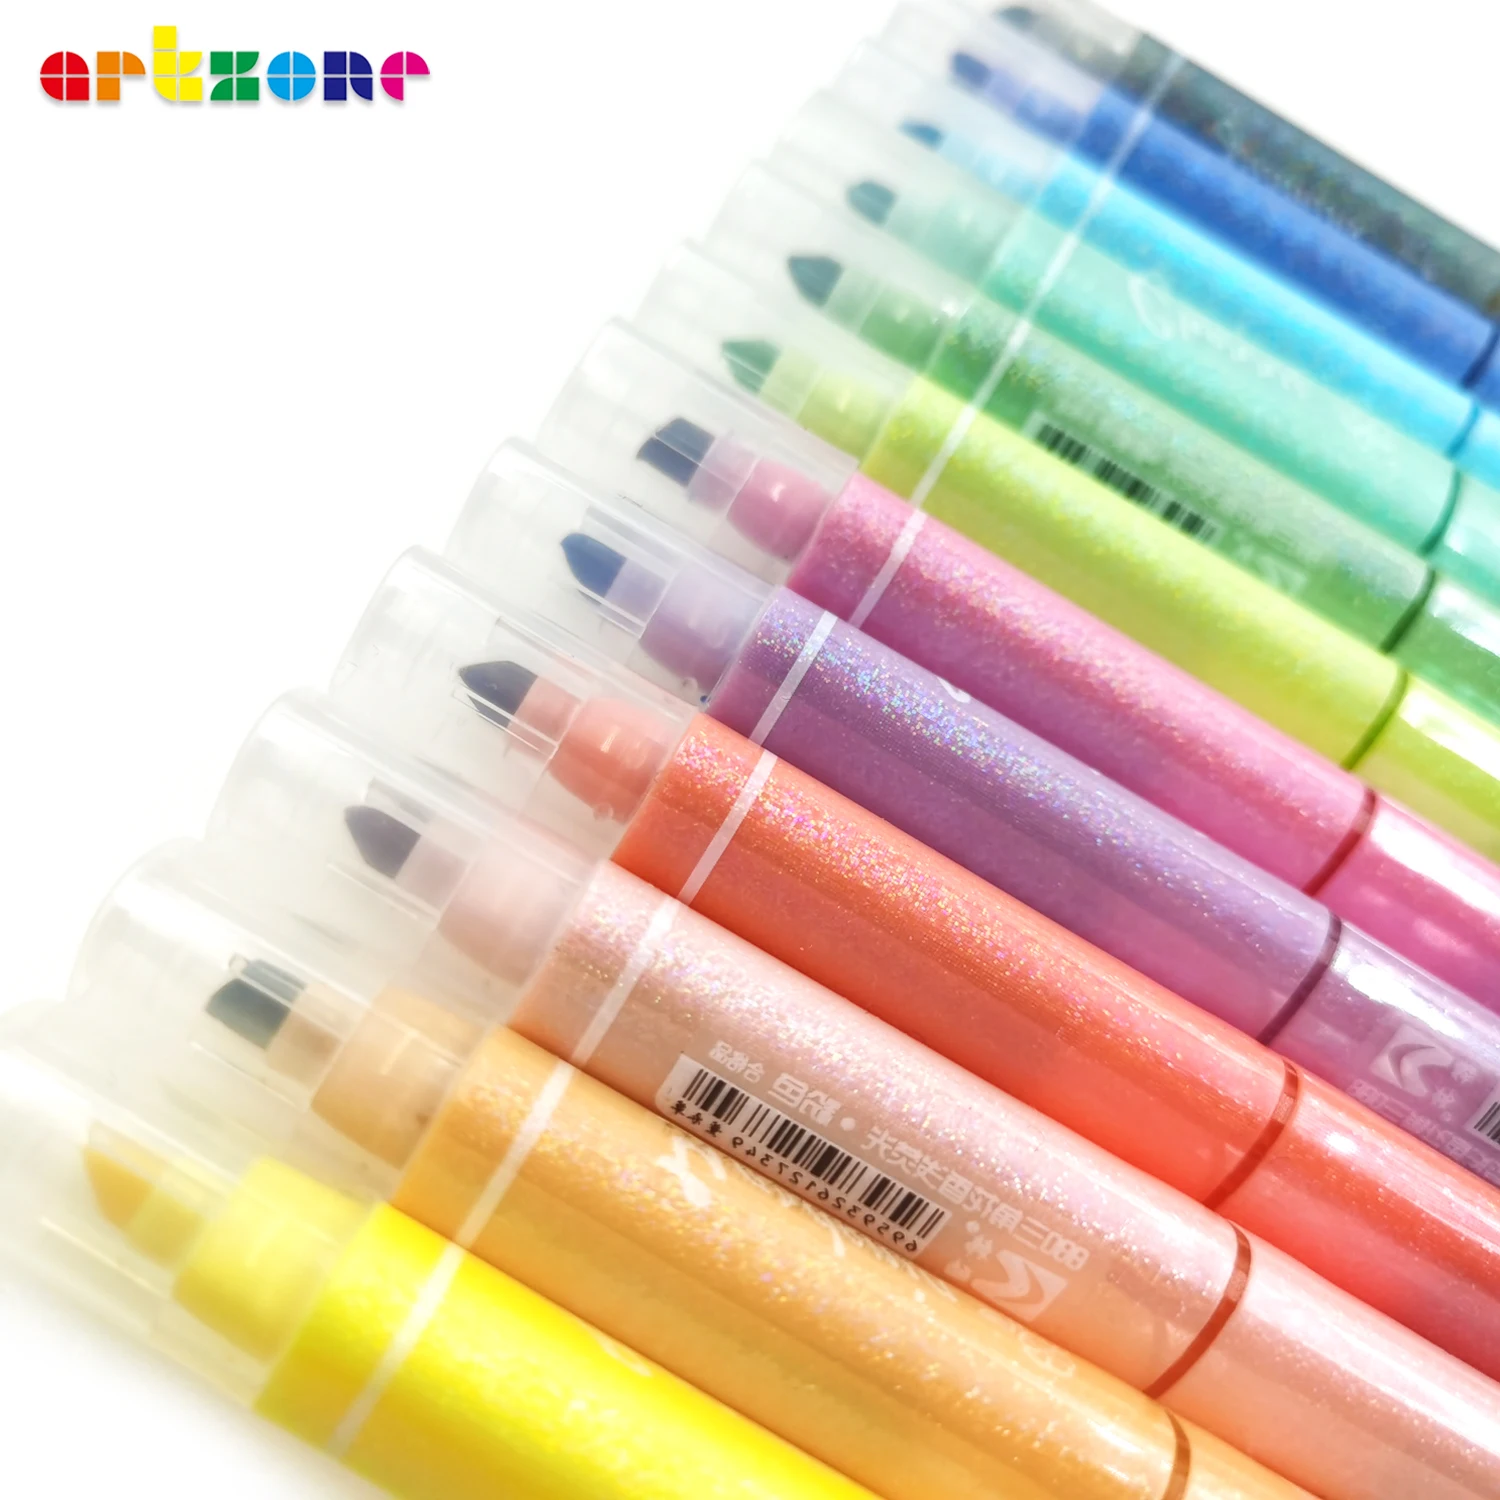 

12pcs Sweet Flower Scented Highlighter Pen Dual Tip Triangular Shaped Non-Toxic Soft Color Fluorescent Markers for Students